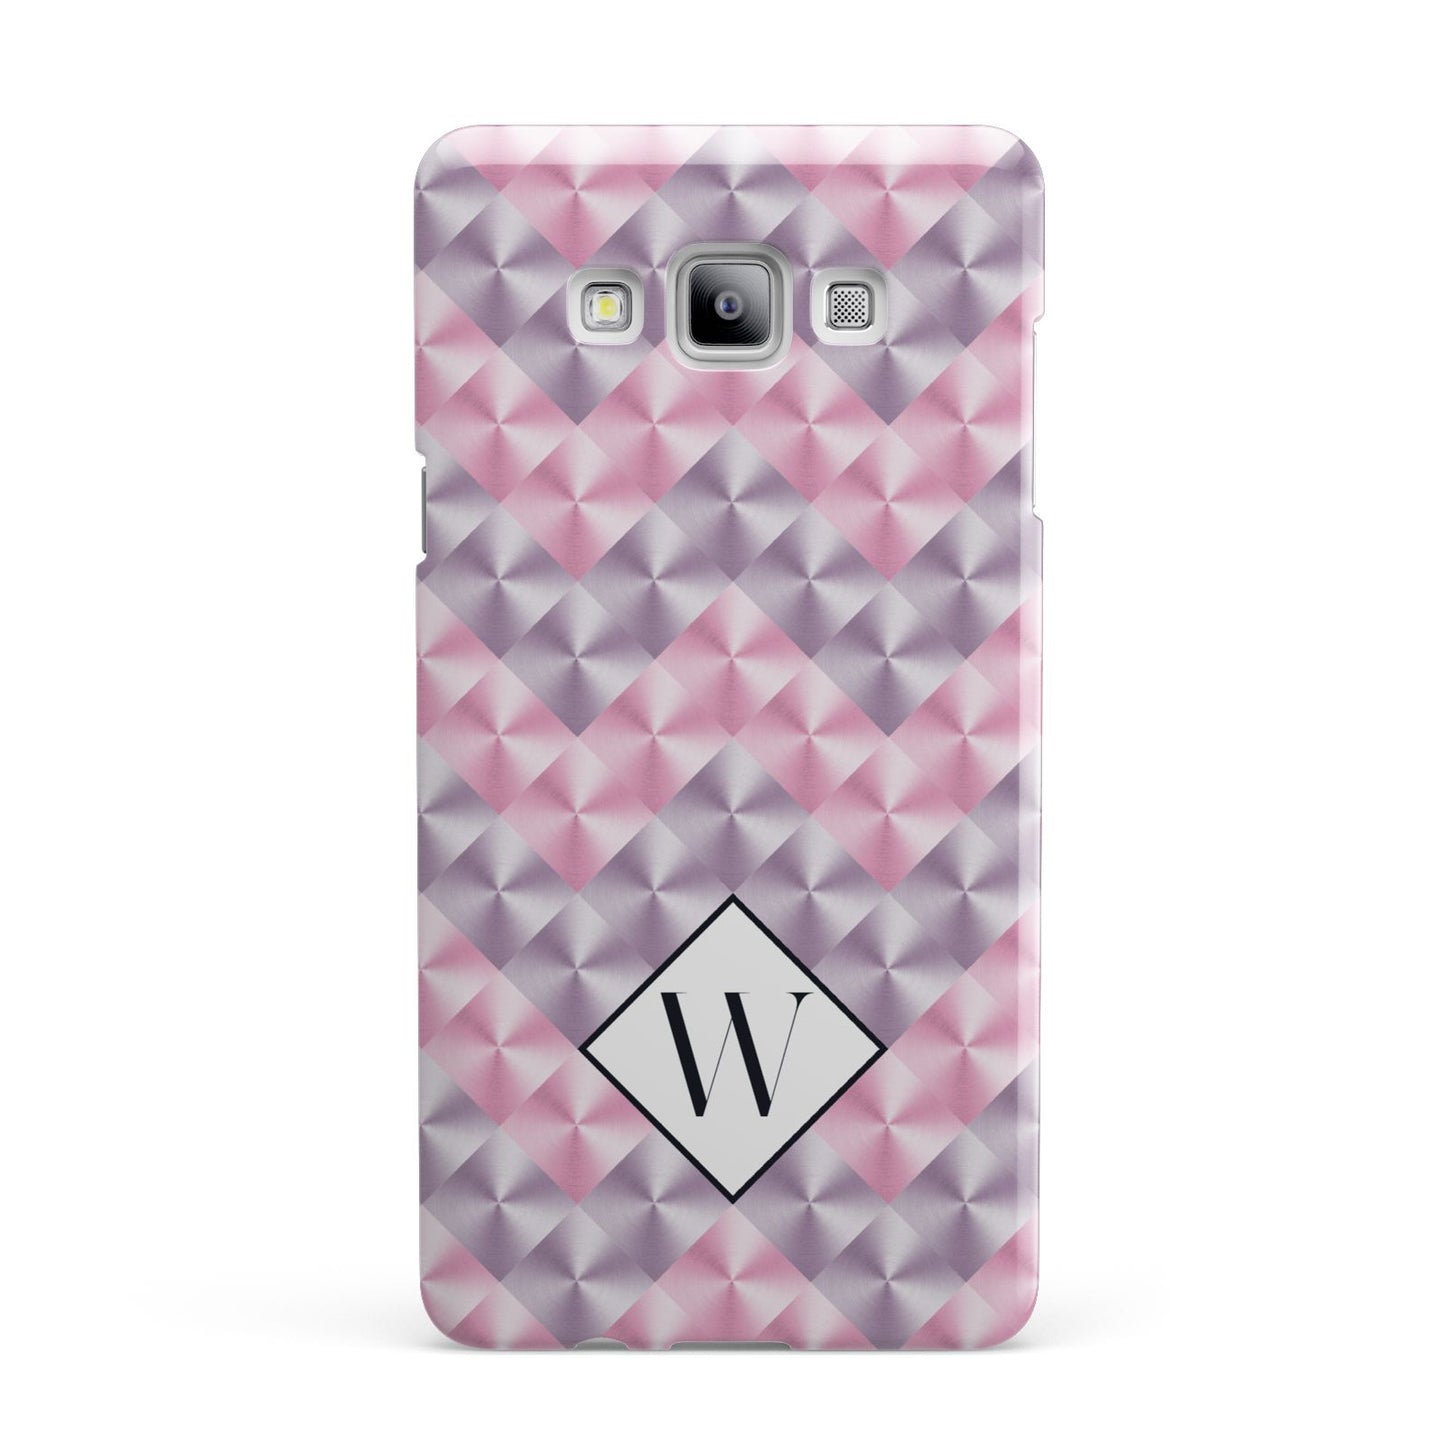 Personalised Mother Of Pearl Monogram Letter Samsung Galaxy A7 2015 Case